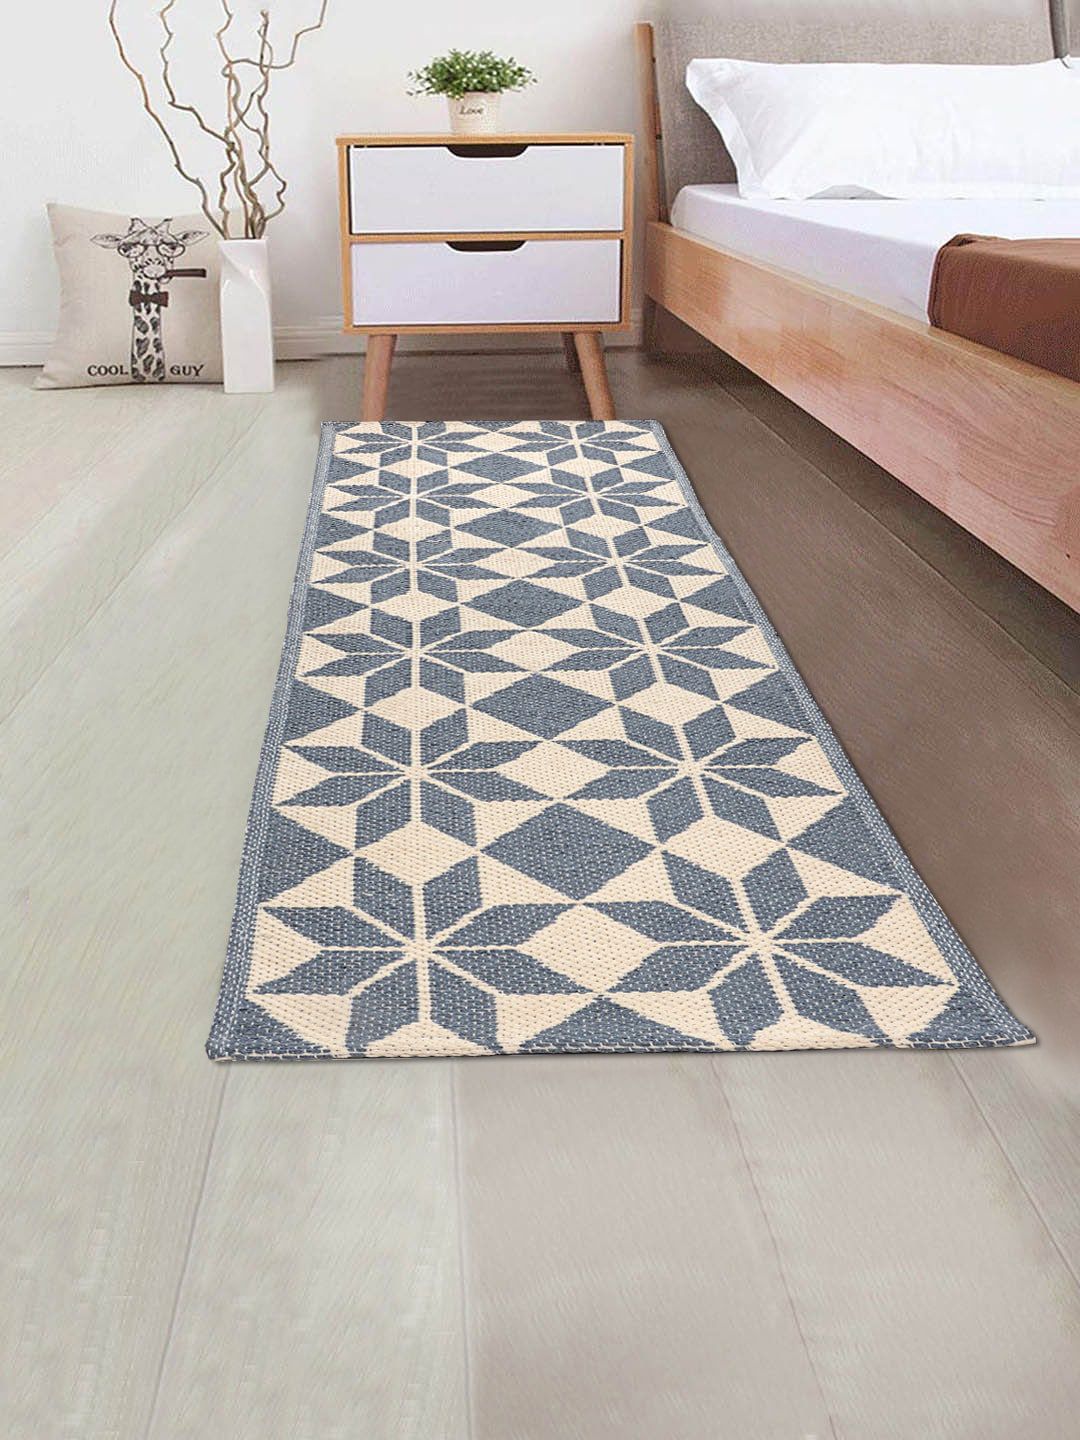 Saral Home Blue Cotton Geometric Printed Anti Skid Floor Runner Price in India